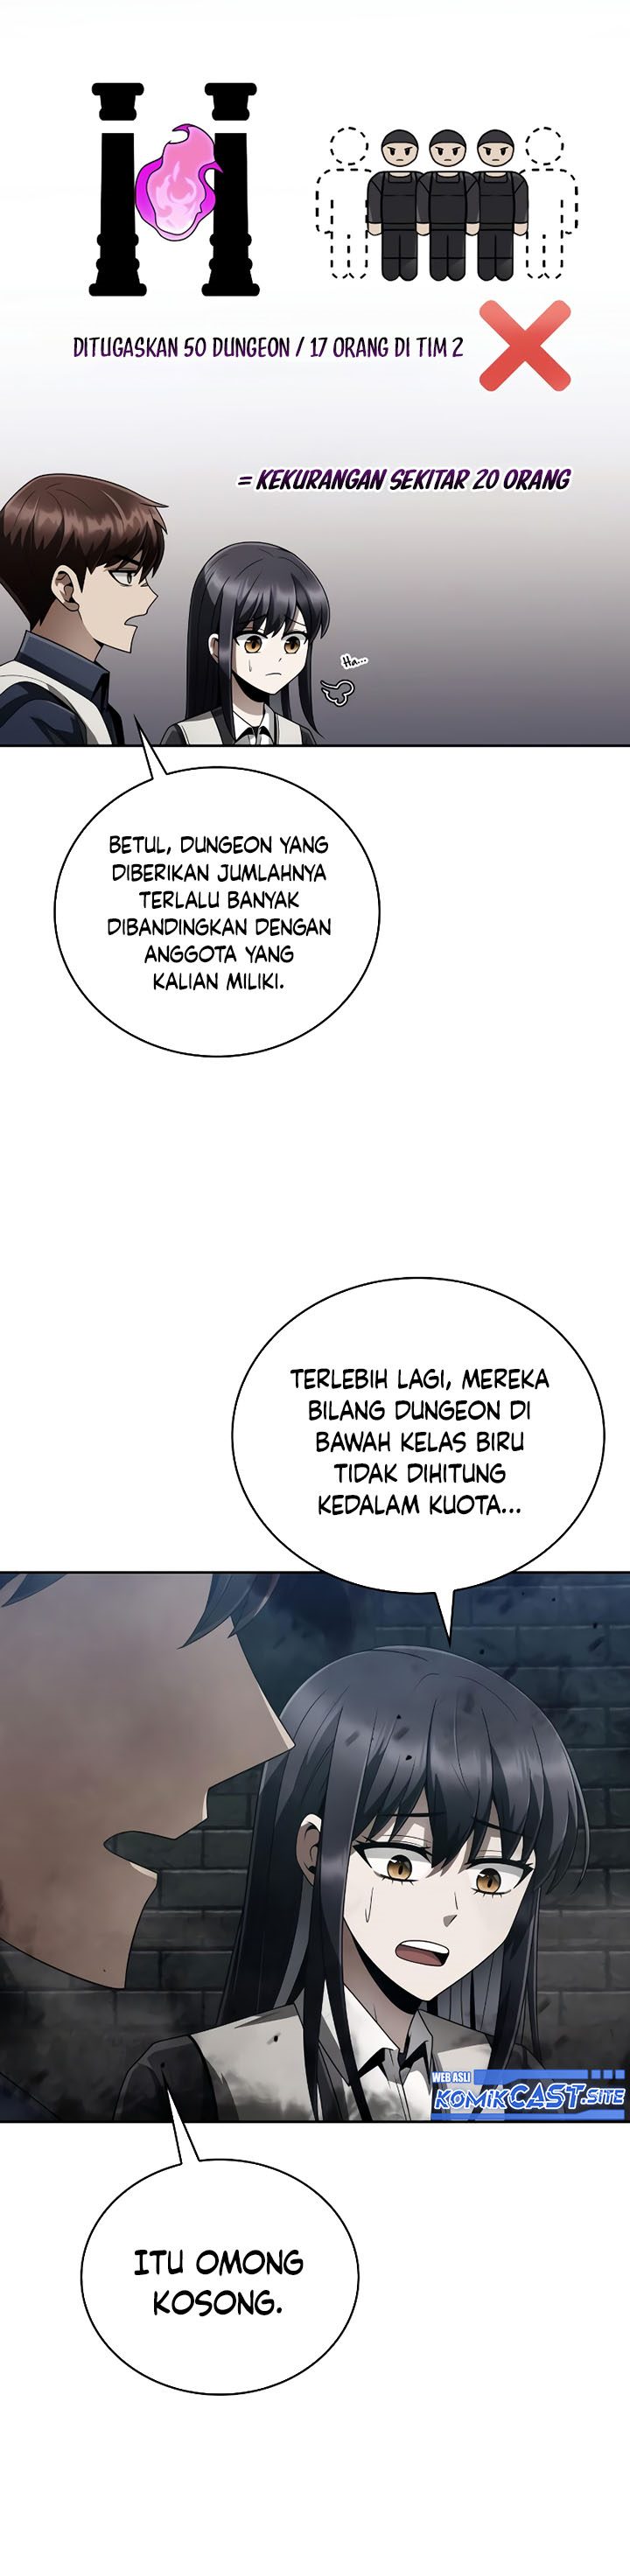 Dilarang COPAS - situs resmi www.mangacanblog.com - Komik clever cleaning life of the returned genius hunter 019 - chapter 19 20 Indonesia clever cleaning life of the returned genius hunter 019 - chapter 19 Terbaru 9|Baca Manga Komik Indonesia|Mangacan